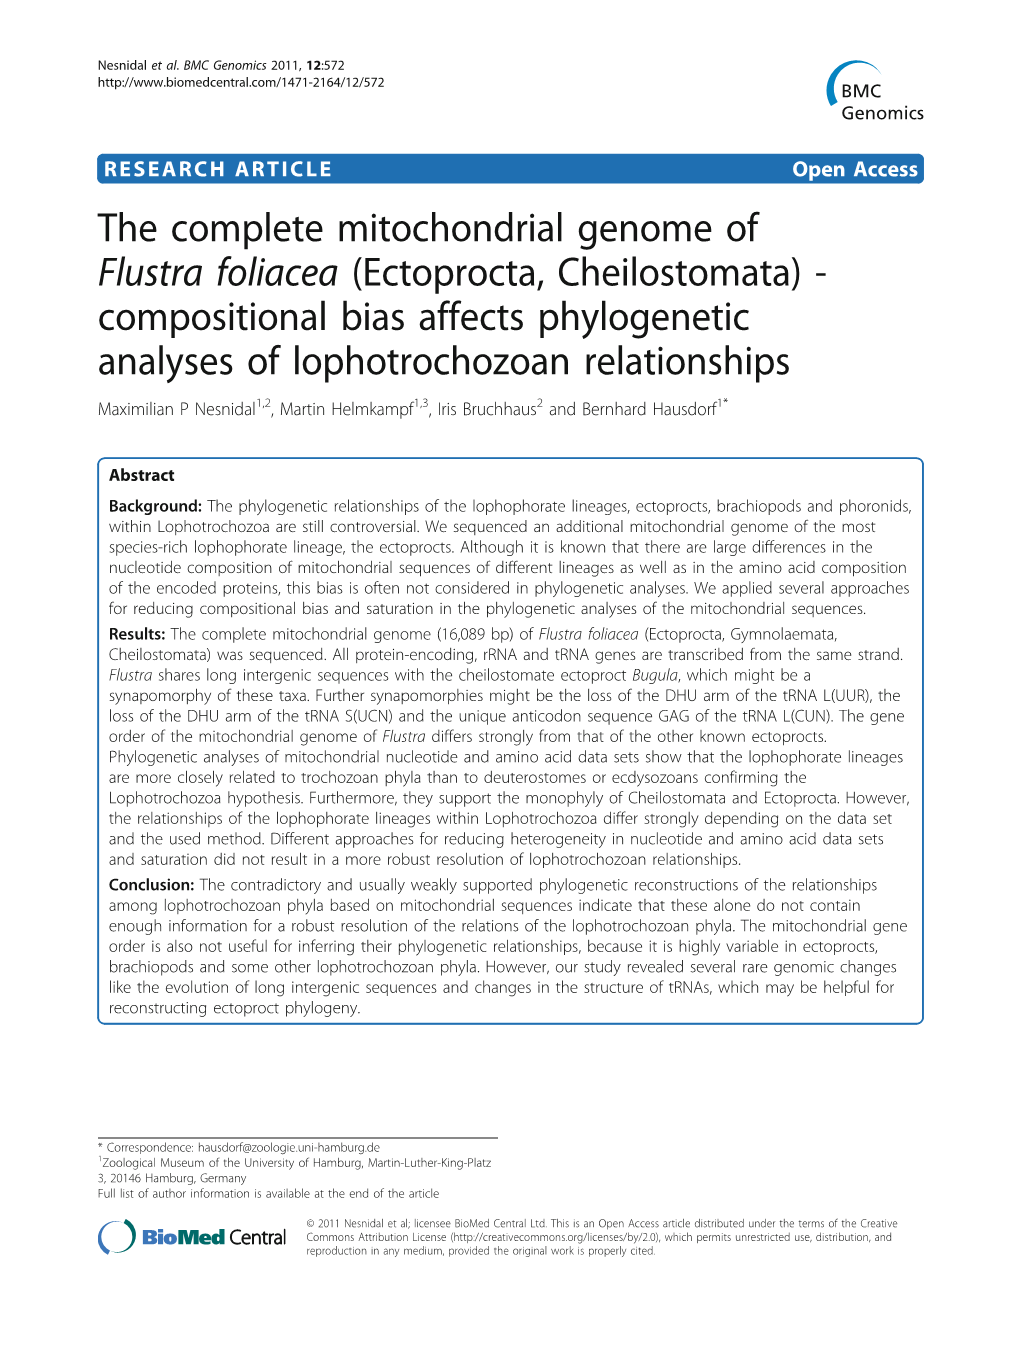 The Complete Mitochondrial Genome of Flustra Foliacea